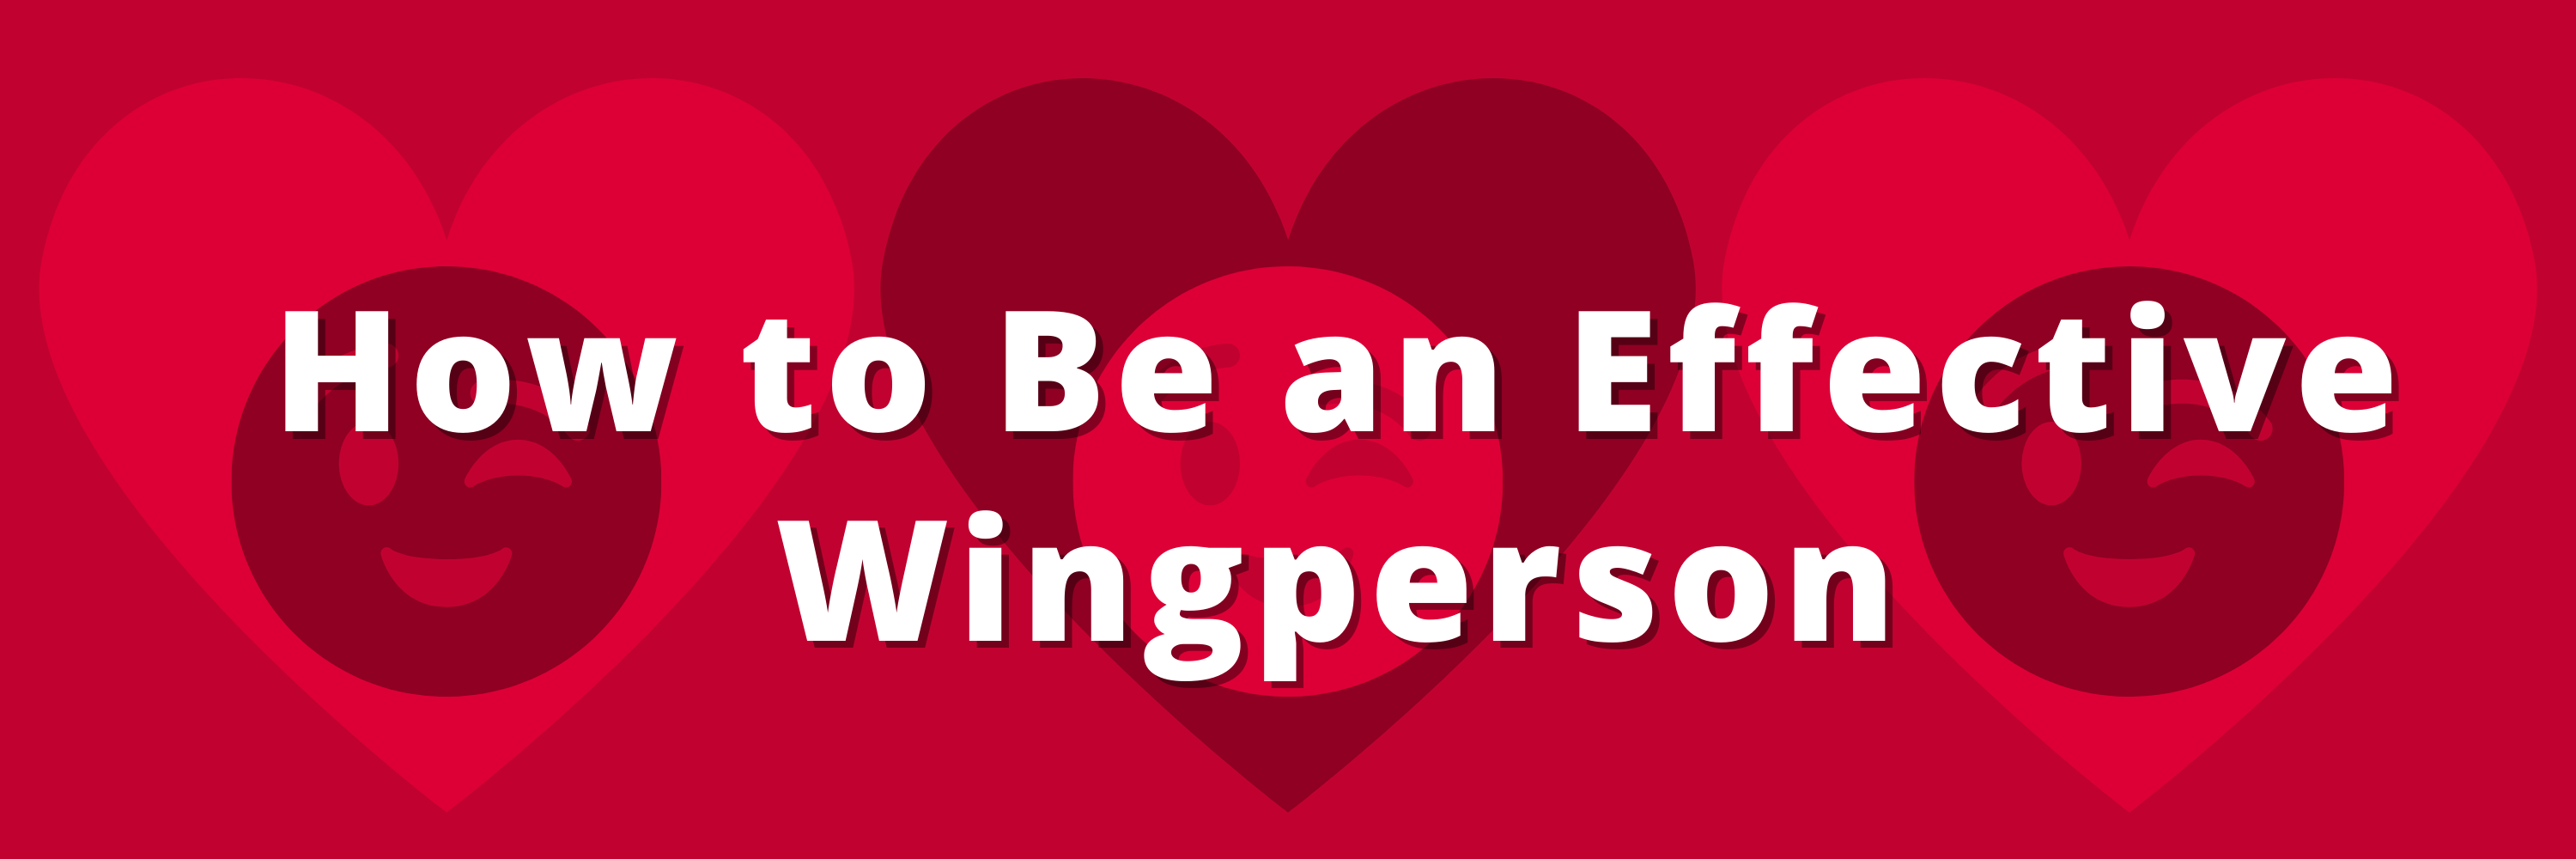 "How to be an effective wingperson" 